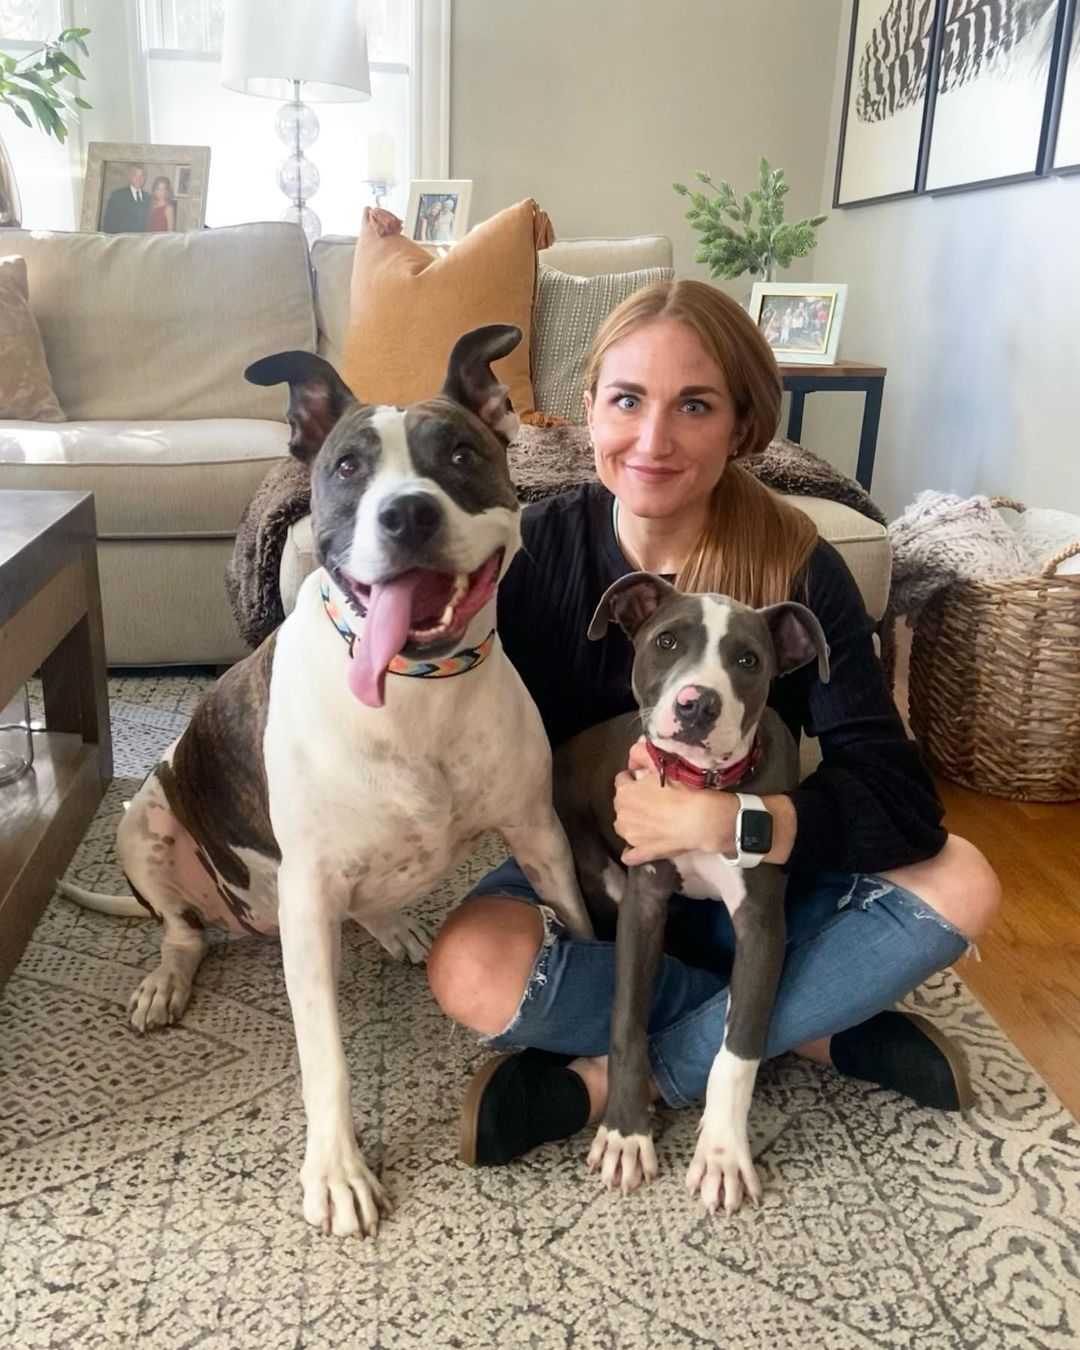 Bernie now Abe is home! This sweet, adorable and sassy boy hit the jackpot with his dog walker mom, Jen, and sweet pittie sister, Sky! After being part of a large law enforcement case in which he was 1 of 20 pups rescued by @arlboston, he was fostered by Jacqui and Kevin & Alexa. He’ll be getting daily hikes & adventures with his new mom and we can’t wait to see the breed ambassador he grows into 💙